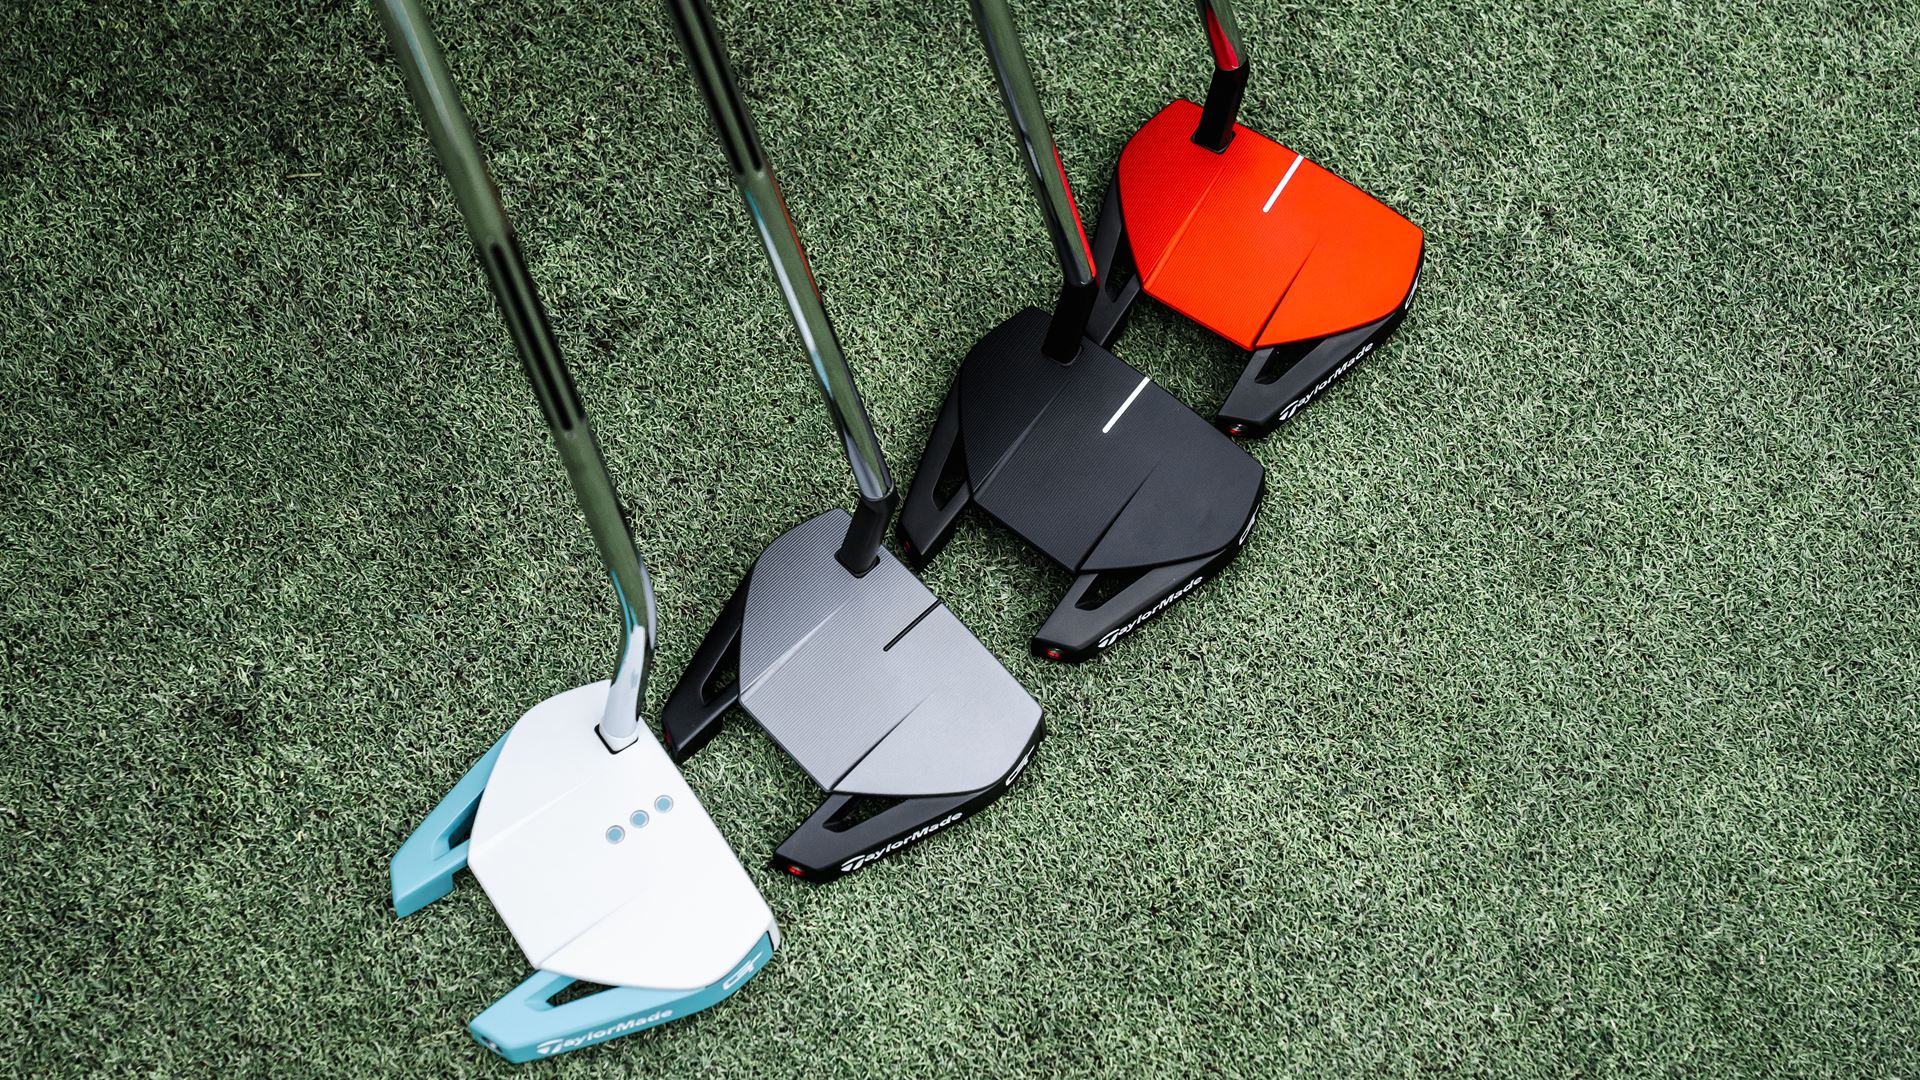 TaylorMade Golf Company Expands Identity of Acclaimed Spider Franchise With The All-New Spider GT Family of Putters